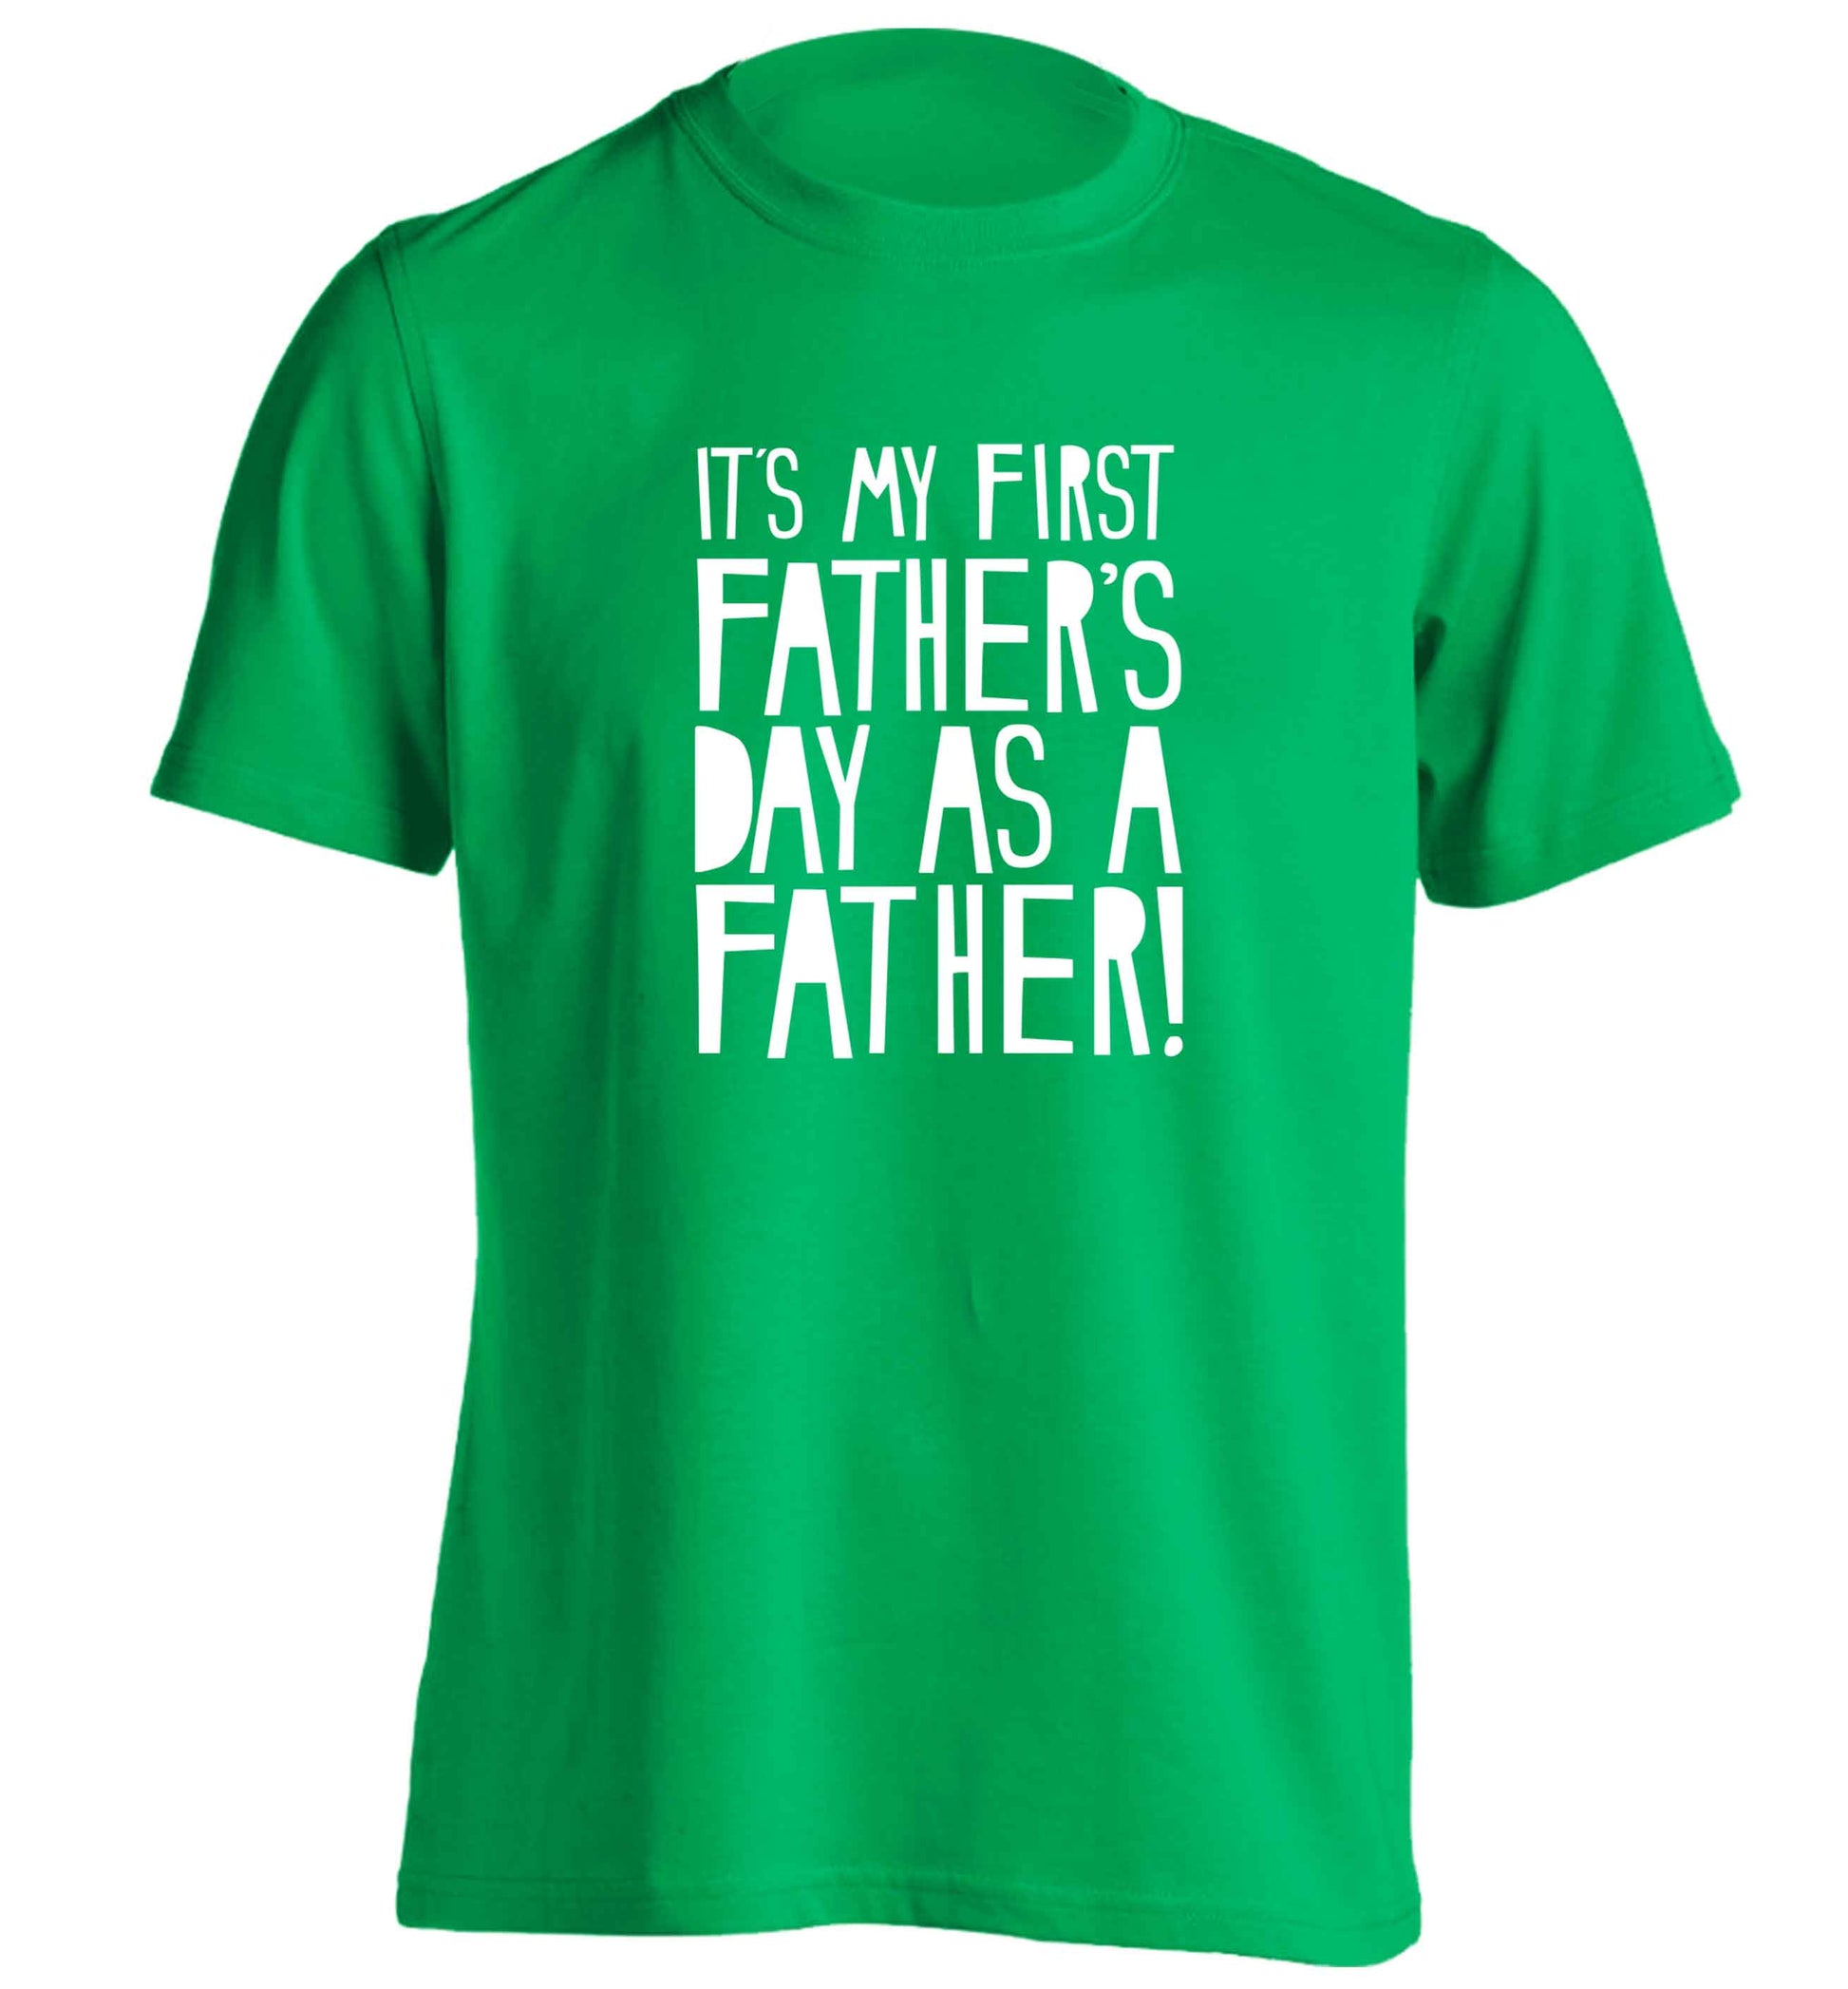 It's my first father's day as a father! adults unisex green Tshirt 2XL